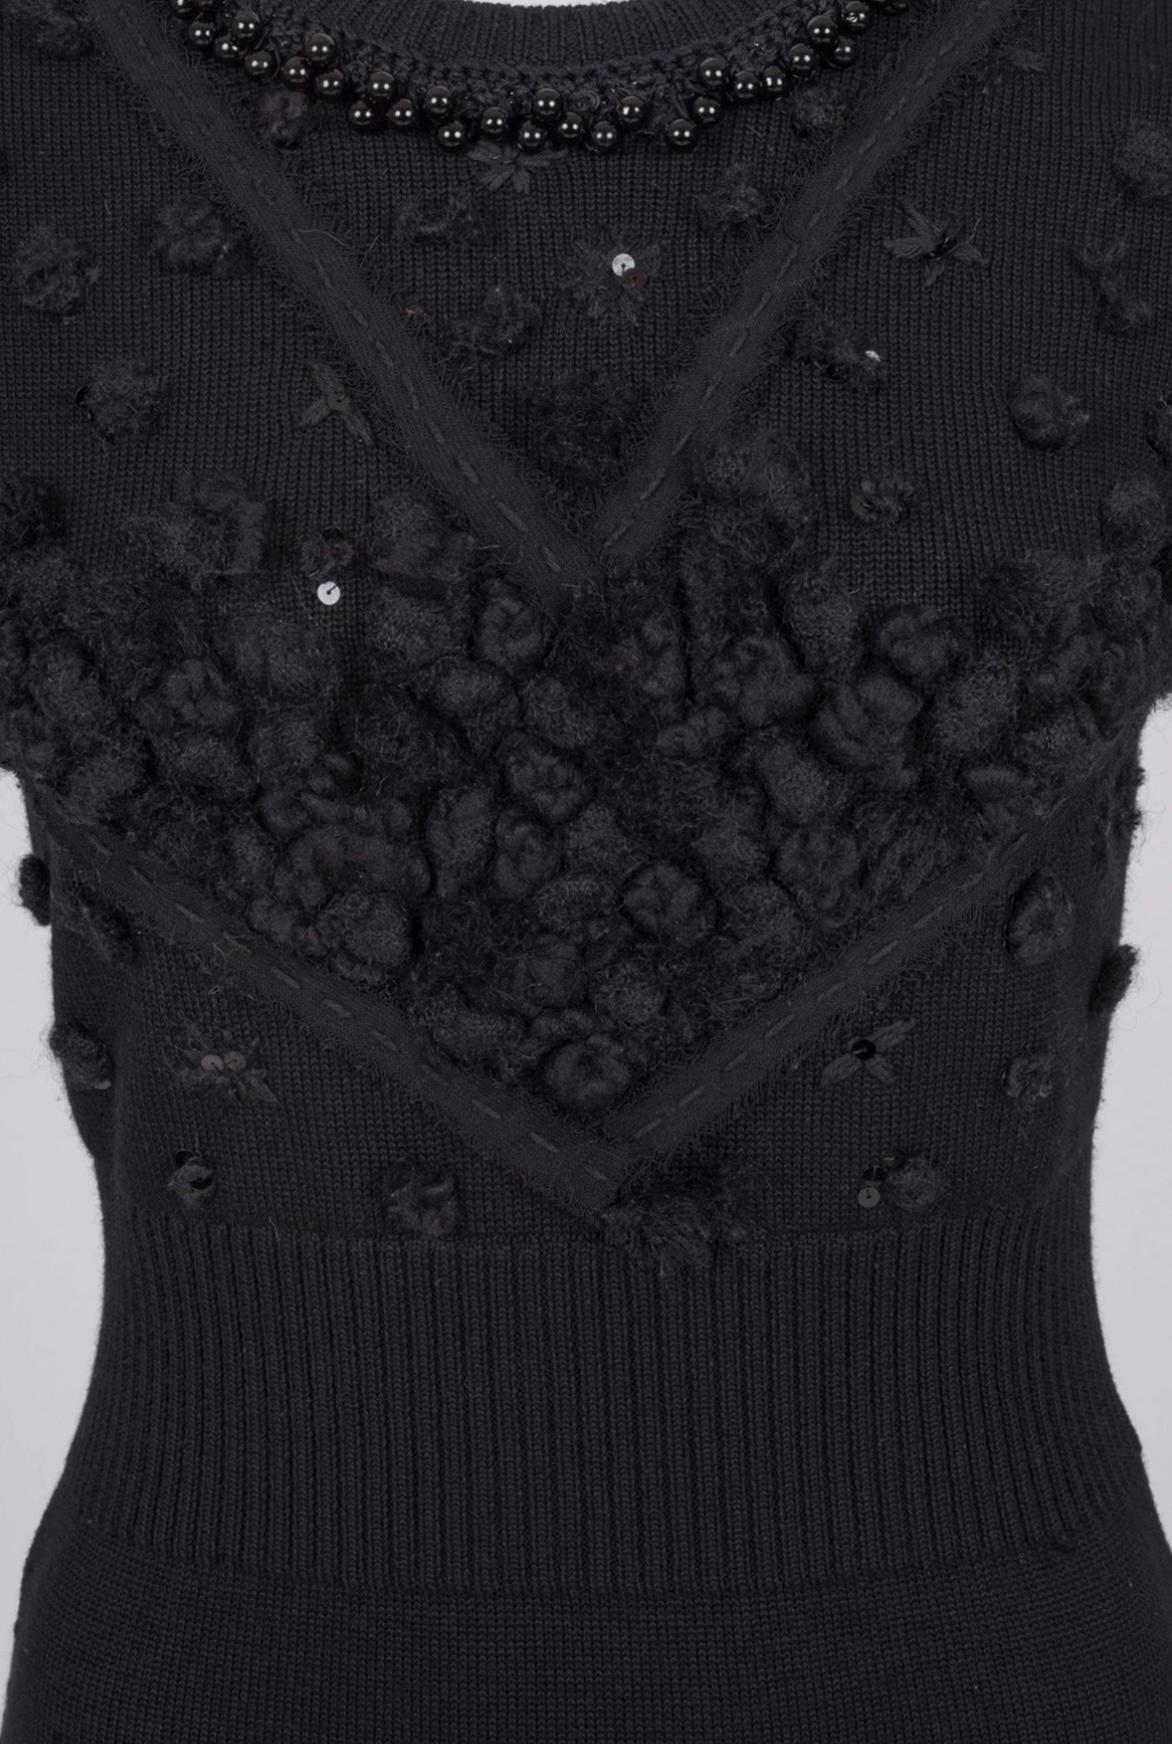 Chanel Pearl Embellished Black Dress with Couture Appliques In Excellent Condition For Sale In Dubai, AE